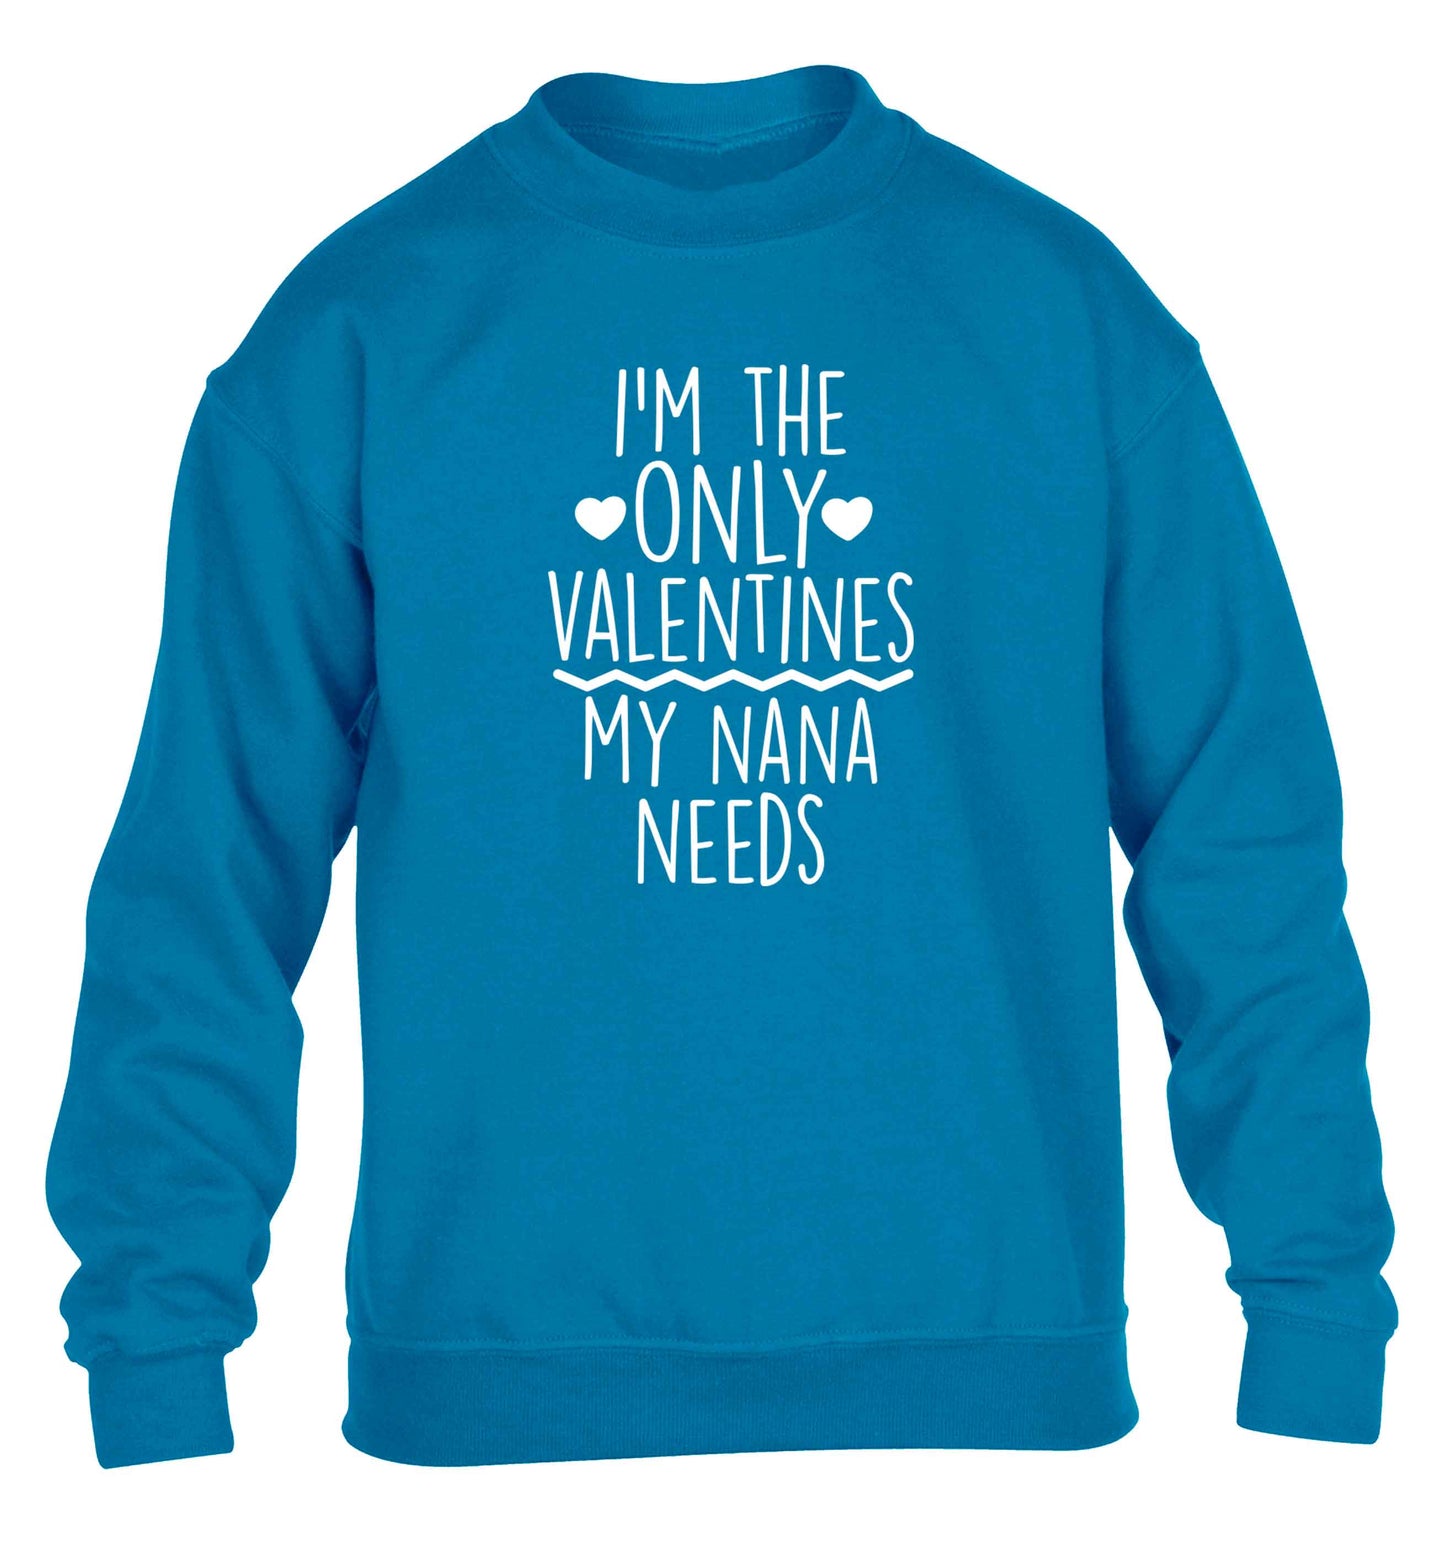 I'm the only valentines my nana needs children's blue sweater 12-13 Years